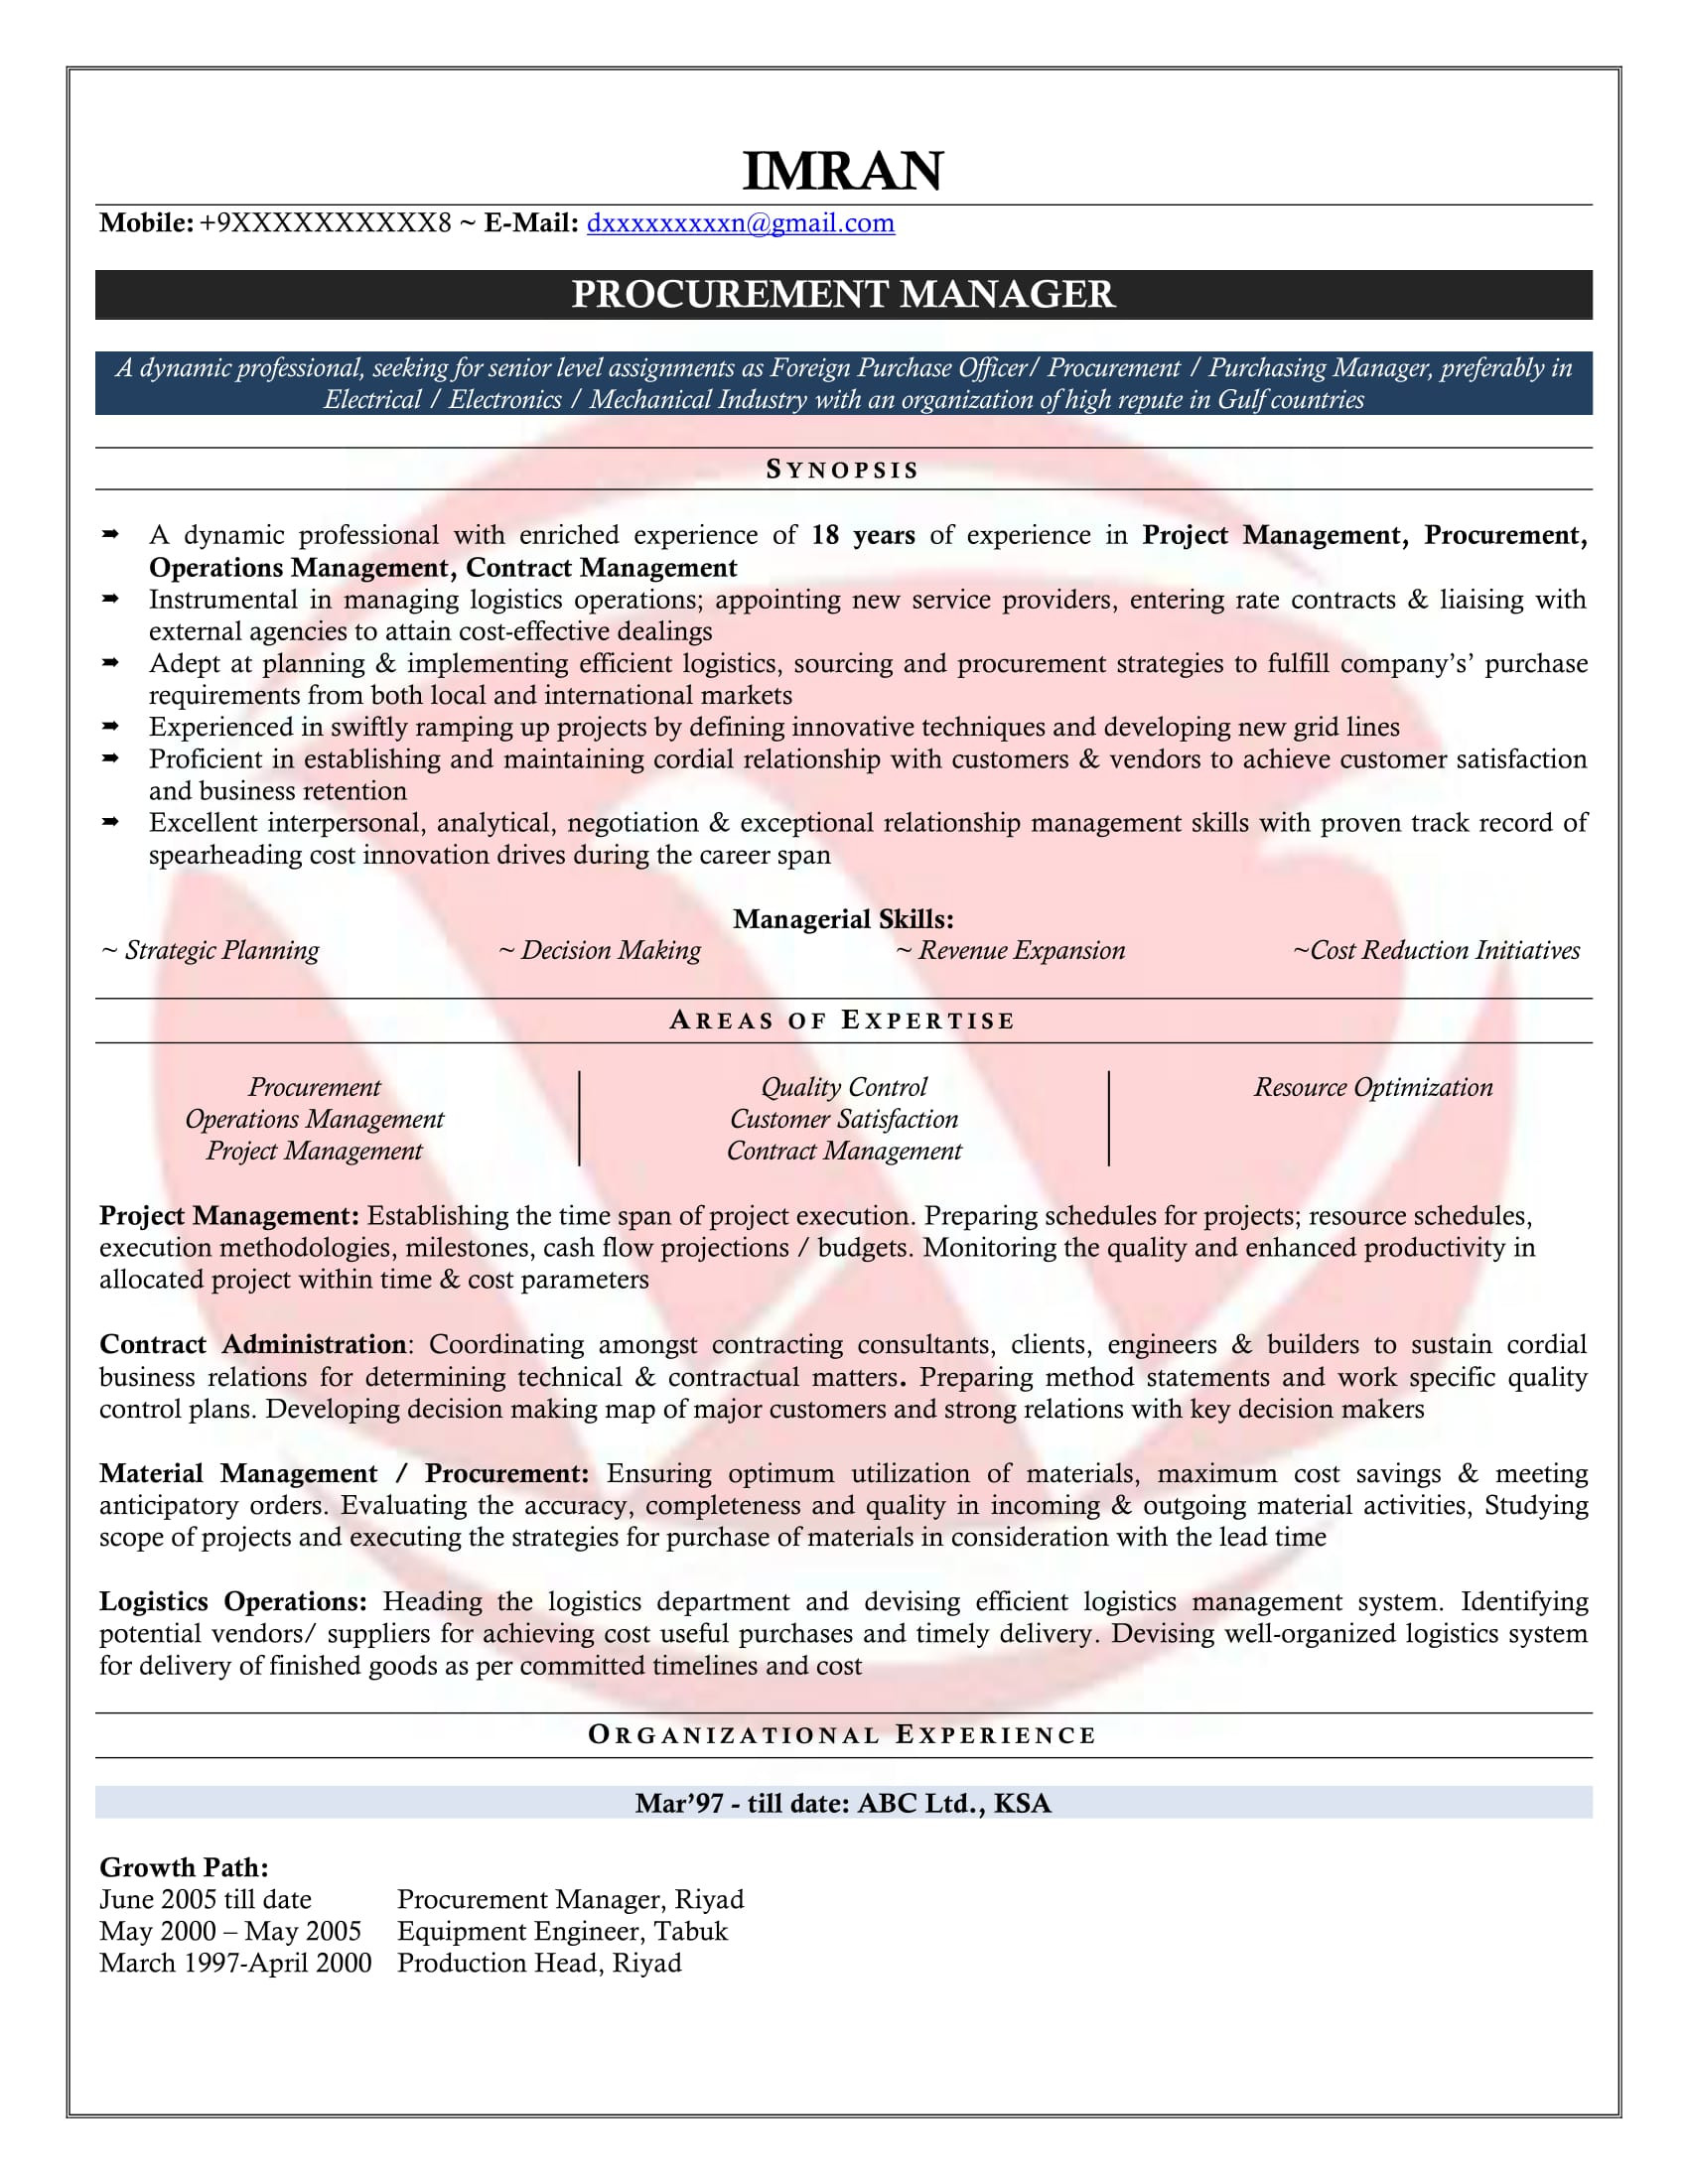 Resume Sample for assistant Manager Purchase Purchase Manager Sample Resumes, Download Resume format Templates!